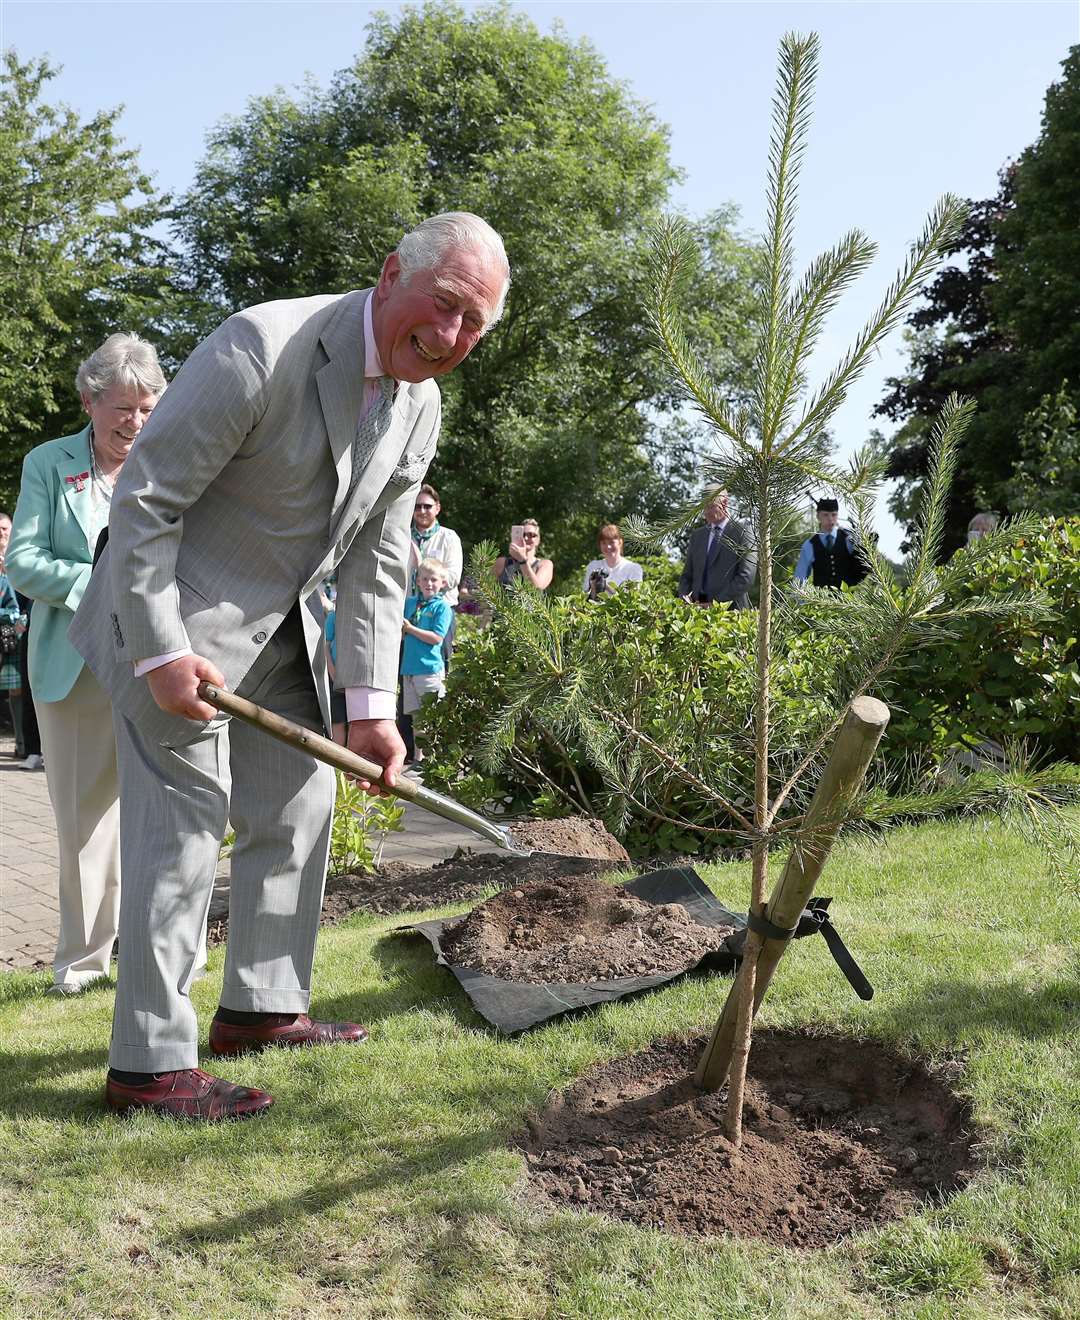 The Prince of Wales plants a tree on an engagement (Andrew Milligan/PA)